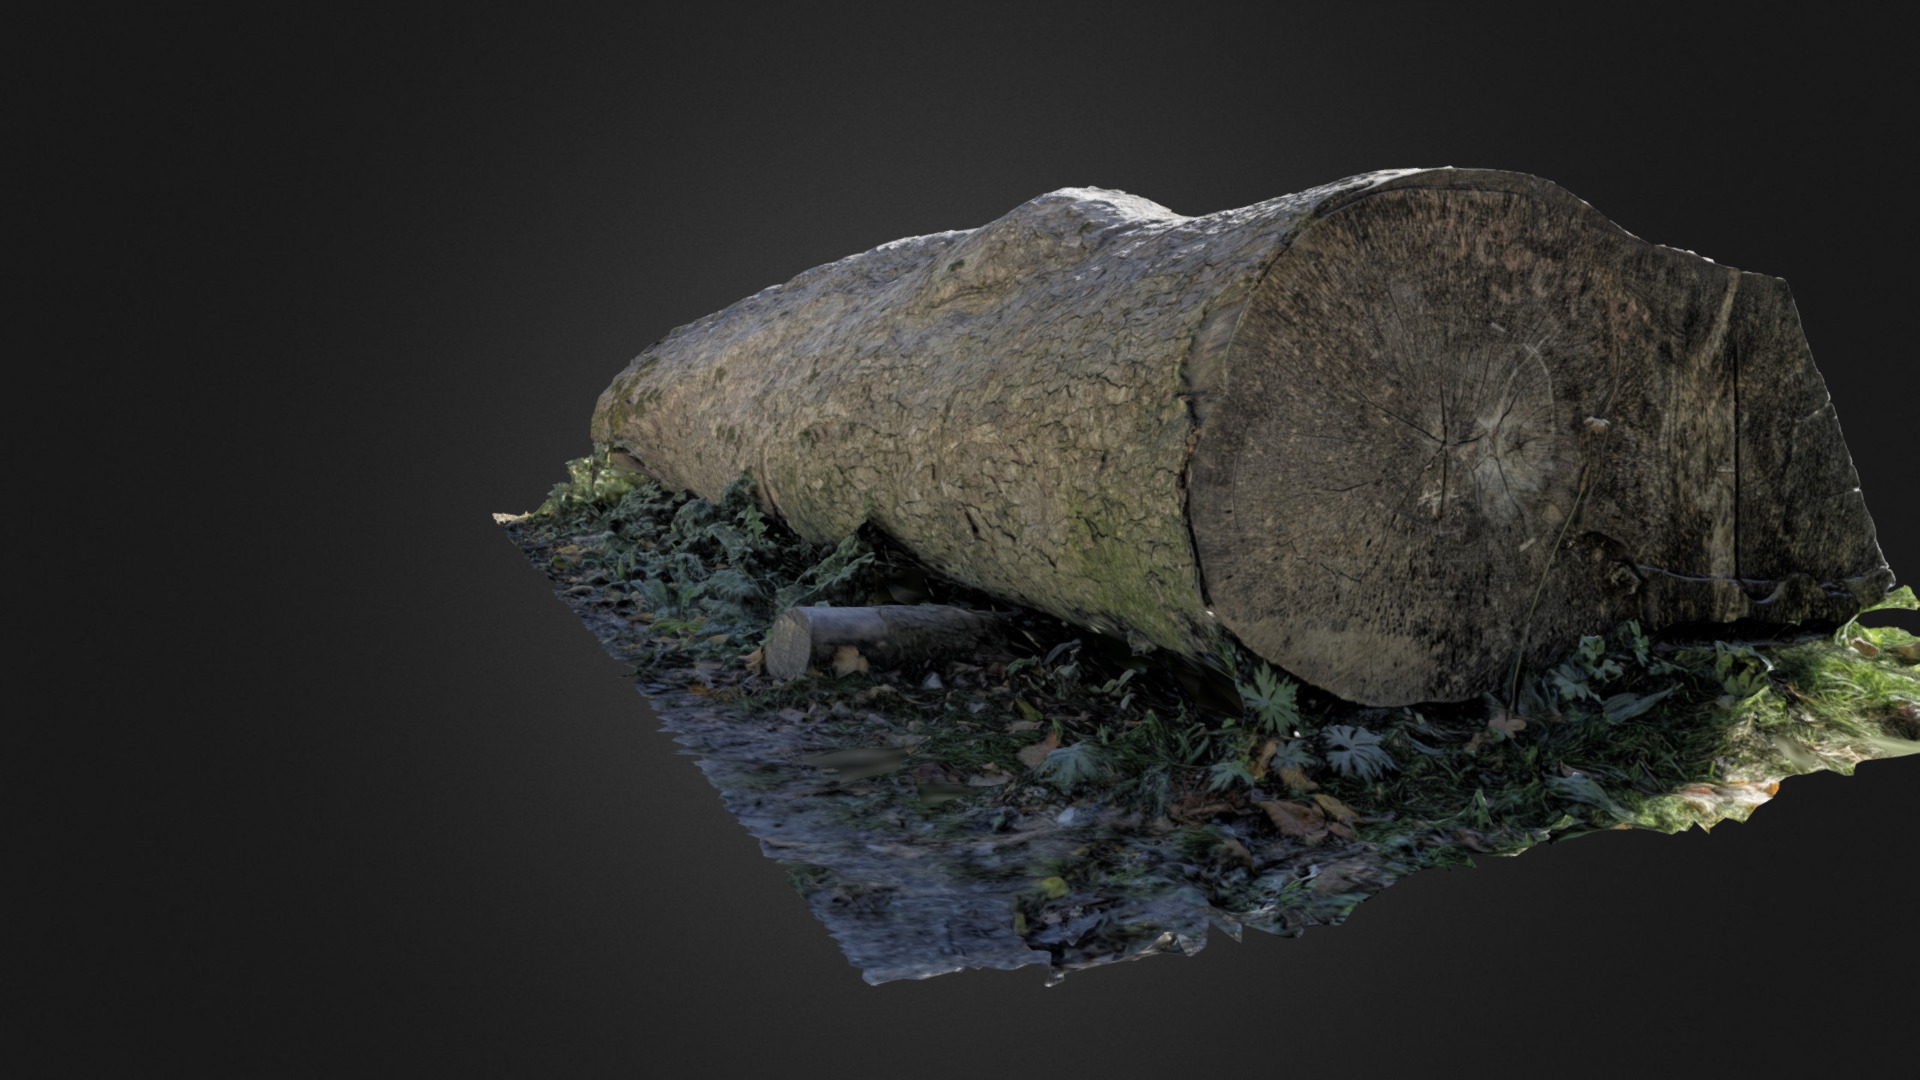 3D model Tree trunk Photogrammetry - This is a 3D model of the Tree trunk Photogrammetry. The 3D model is about a turtle on a rock.